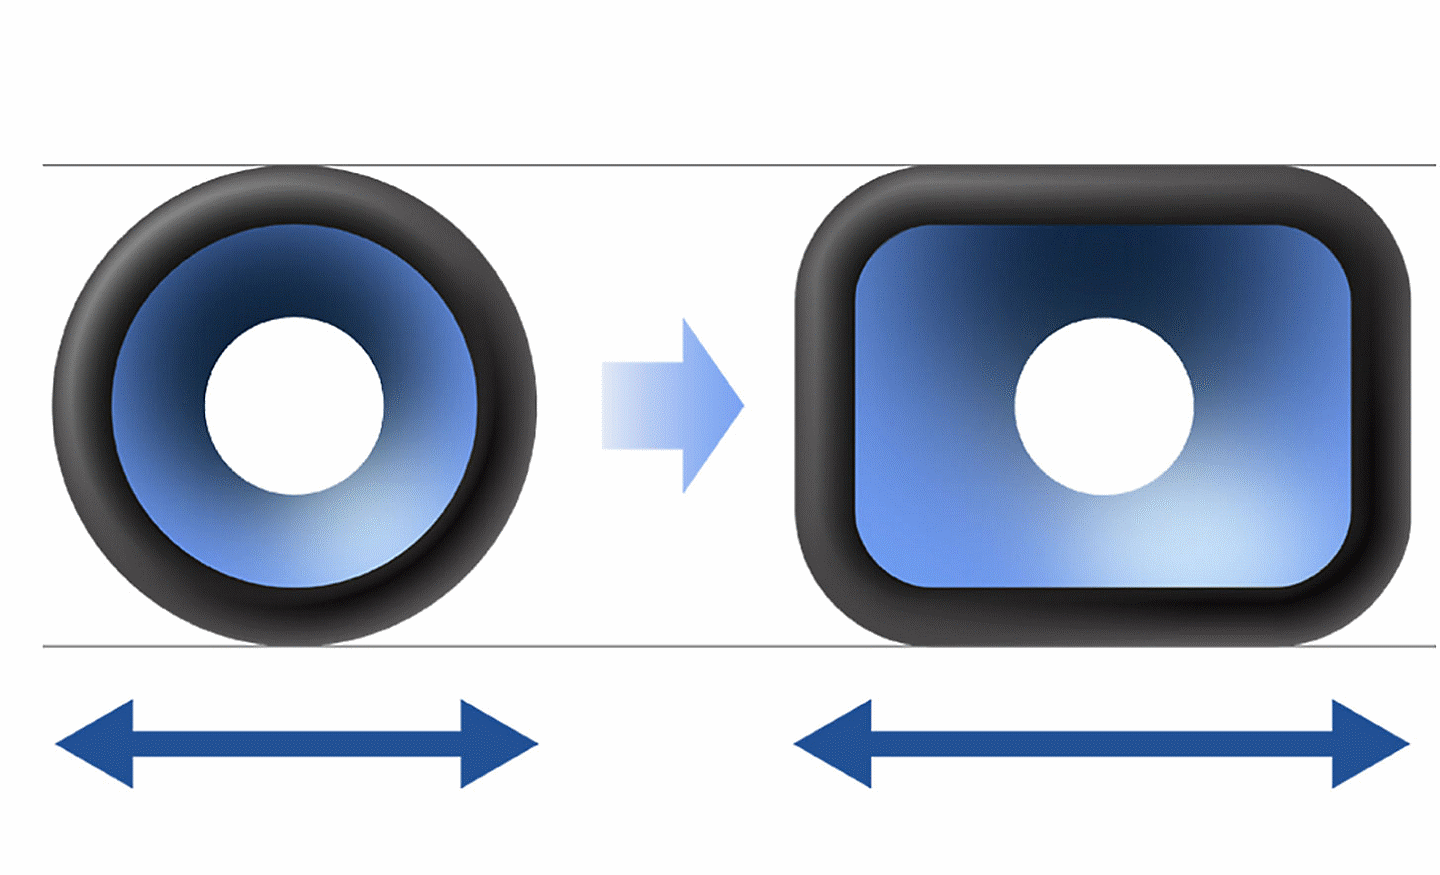 Image of a round speaker on the left and a rectangular speaker on the right with an arrow pointing from left to right in the middle